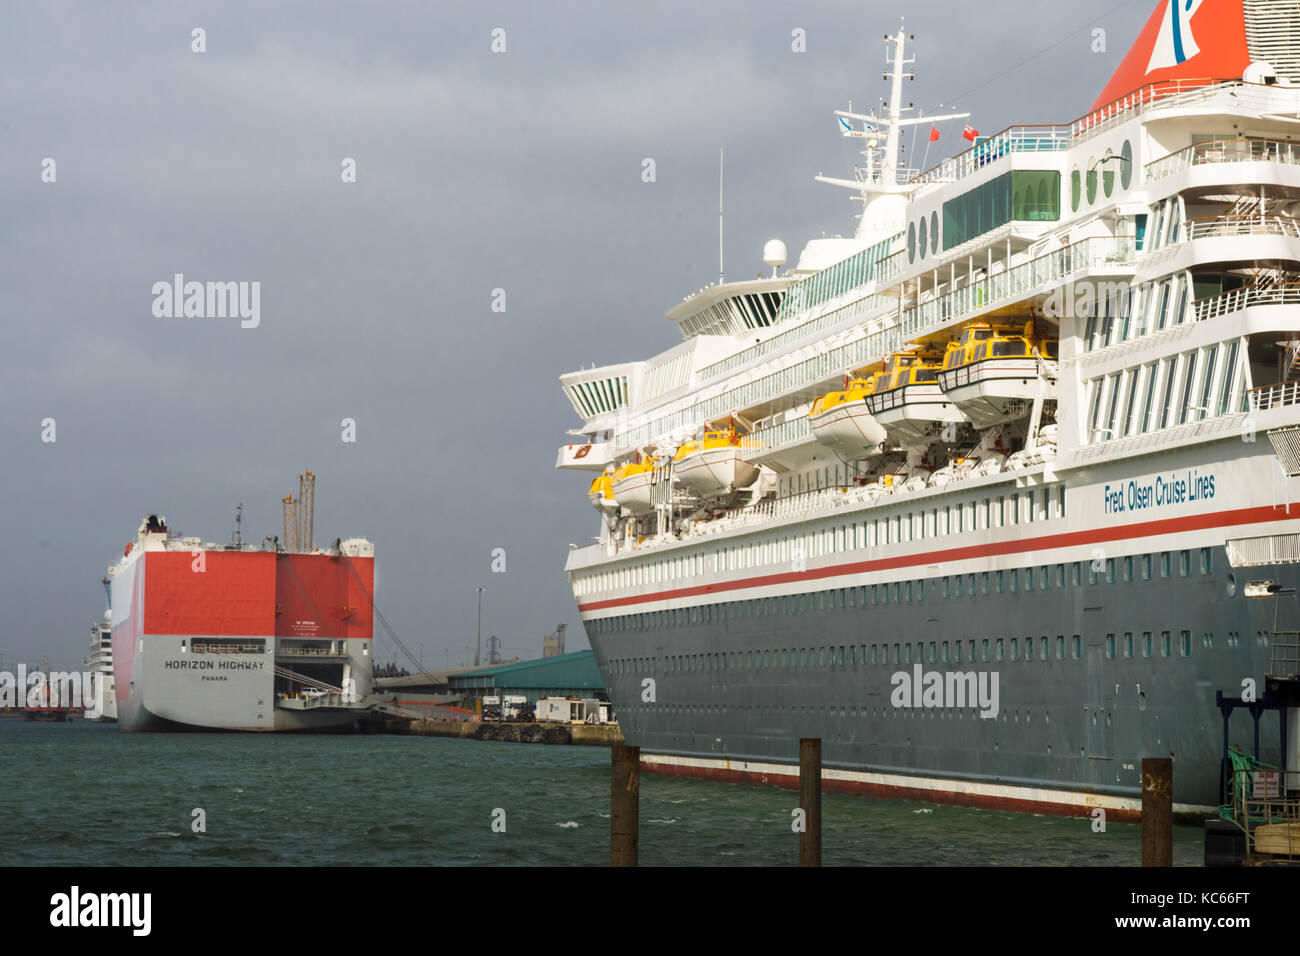 View across over the Southampton Western Docks port with the Balmoral cruise liner berthed in City Cruise Terminal (Berth 101), 2017, Southampton, UK Stock Photo